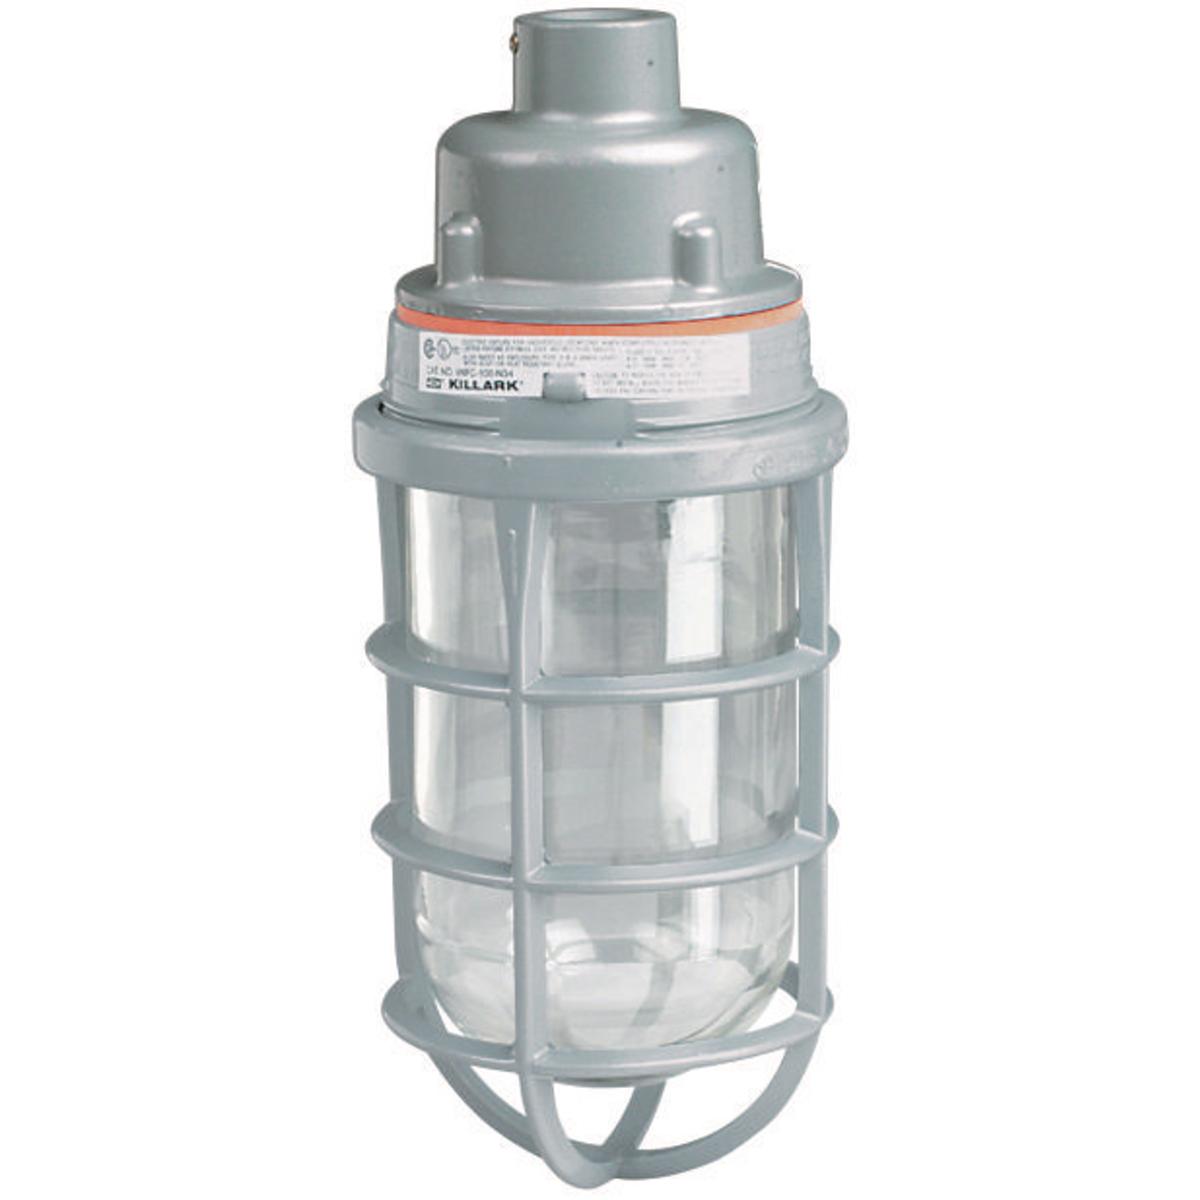 Hubbell VUAGG-1-200PX 300W V Series Incandescent - Pendant - 1/2" Hub With Globe and Guard - Unit Pack  ; Electrostatically applied epoxy/polyester finish ; Modular design ; Hubs are threaded for attachment to conduit ; Set screws in pendant fixture ; Copper-free aluminum (les